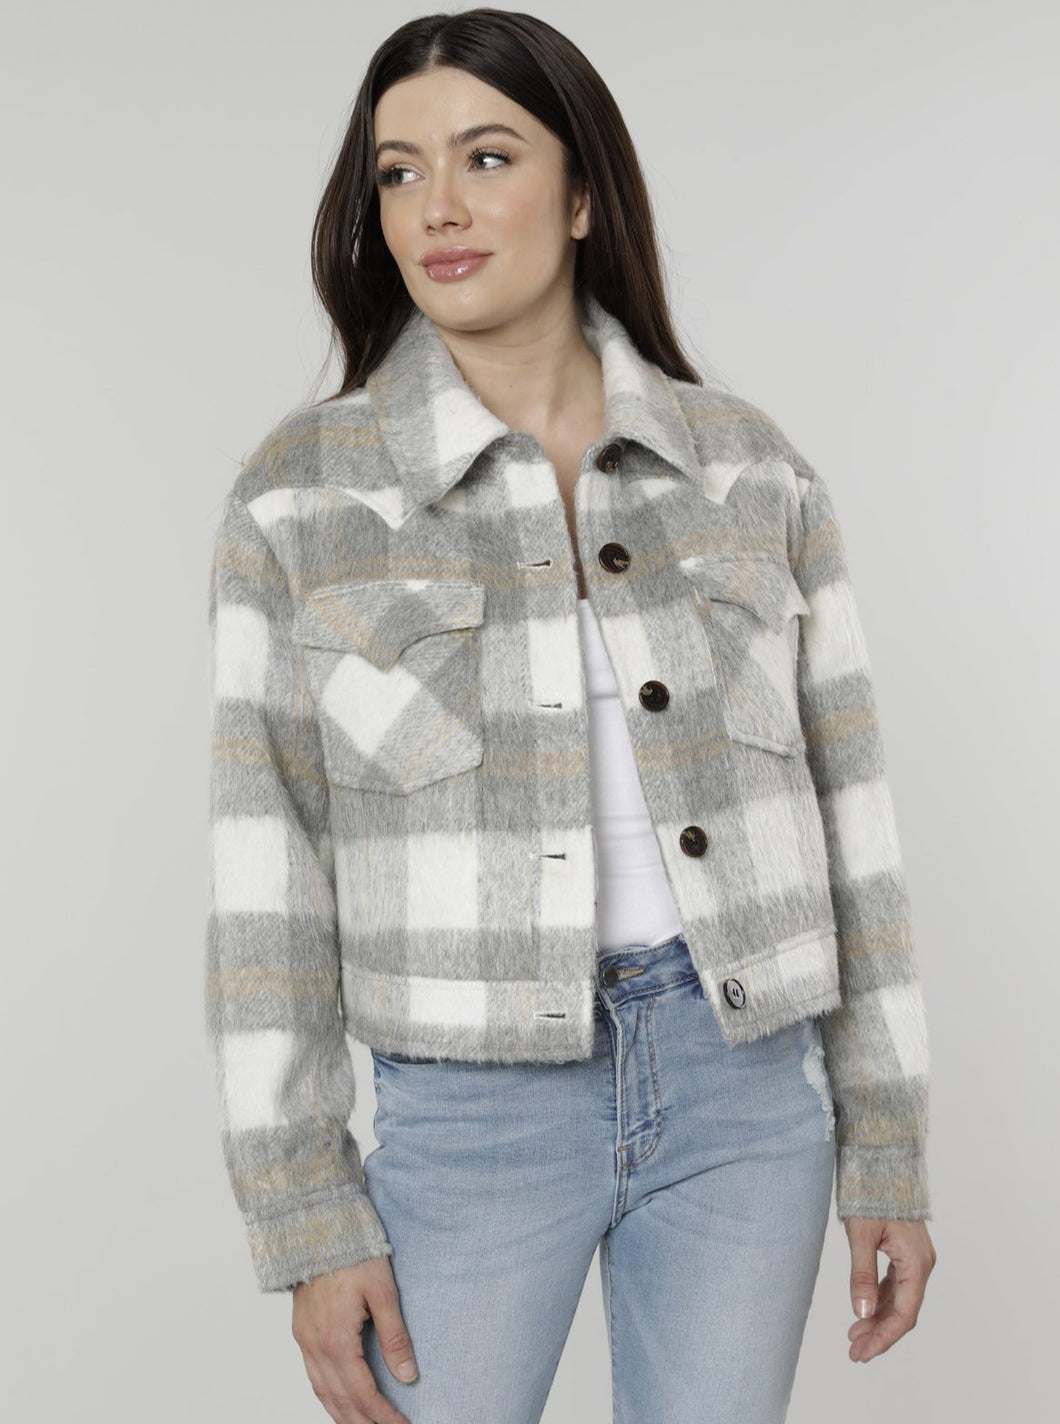 Brushed Flannel Plaid Short Jacket.   100% Polyester Colors: Available in Lavender Plaid Now in new colors: Blue Multi and Grey Multi XS, S, M, L, XL Lavender Plaid Short Jacket Dry Clean Imported Long Sleeves